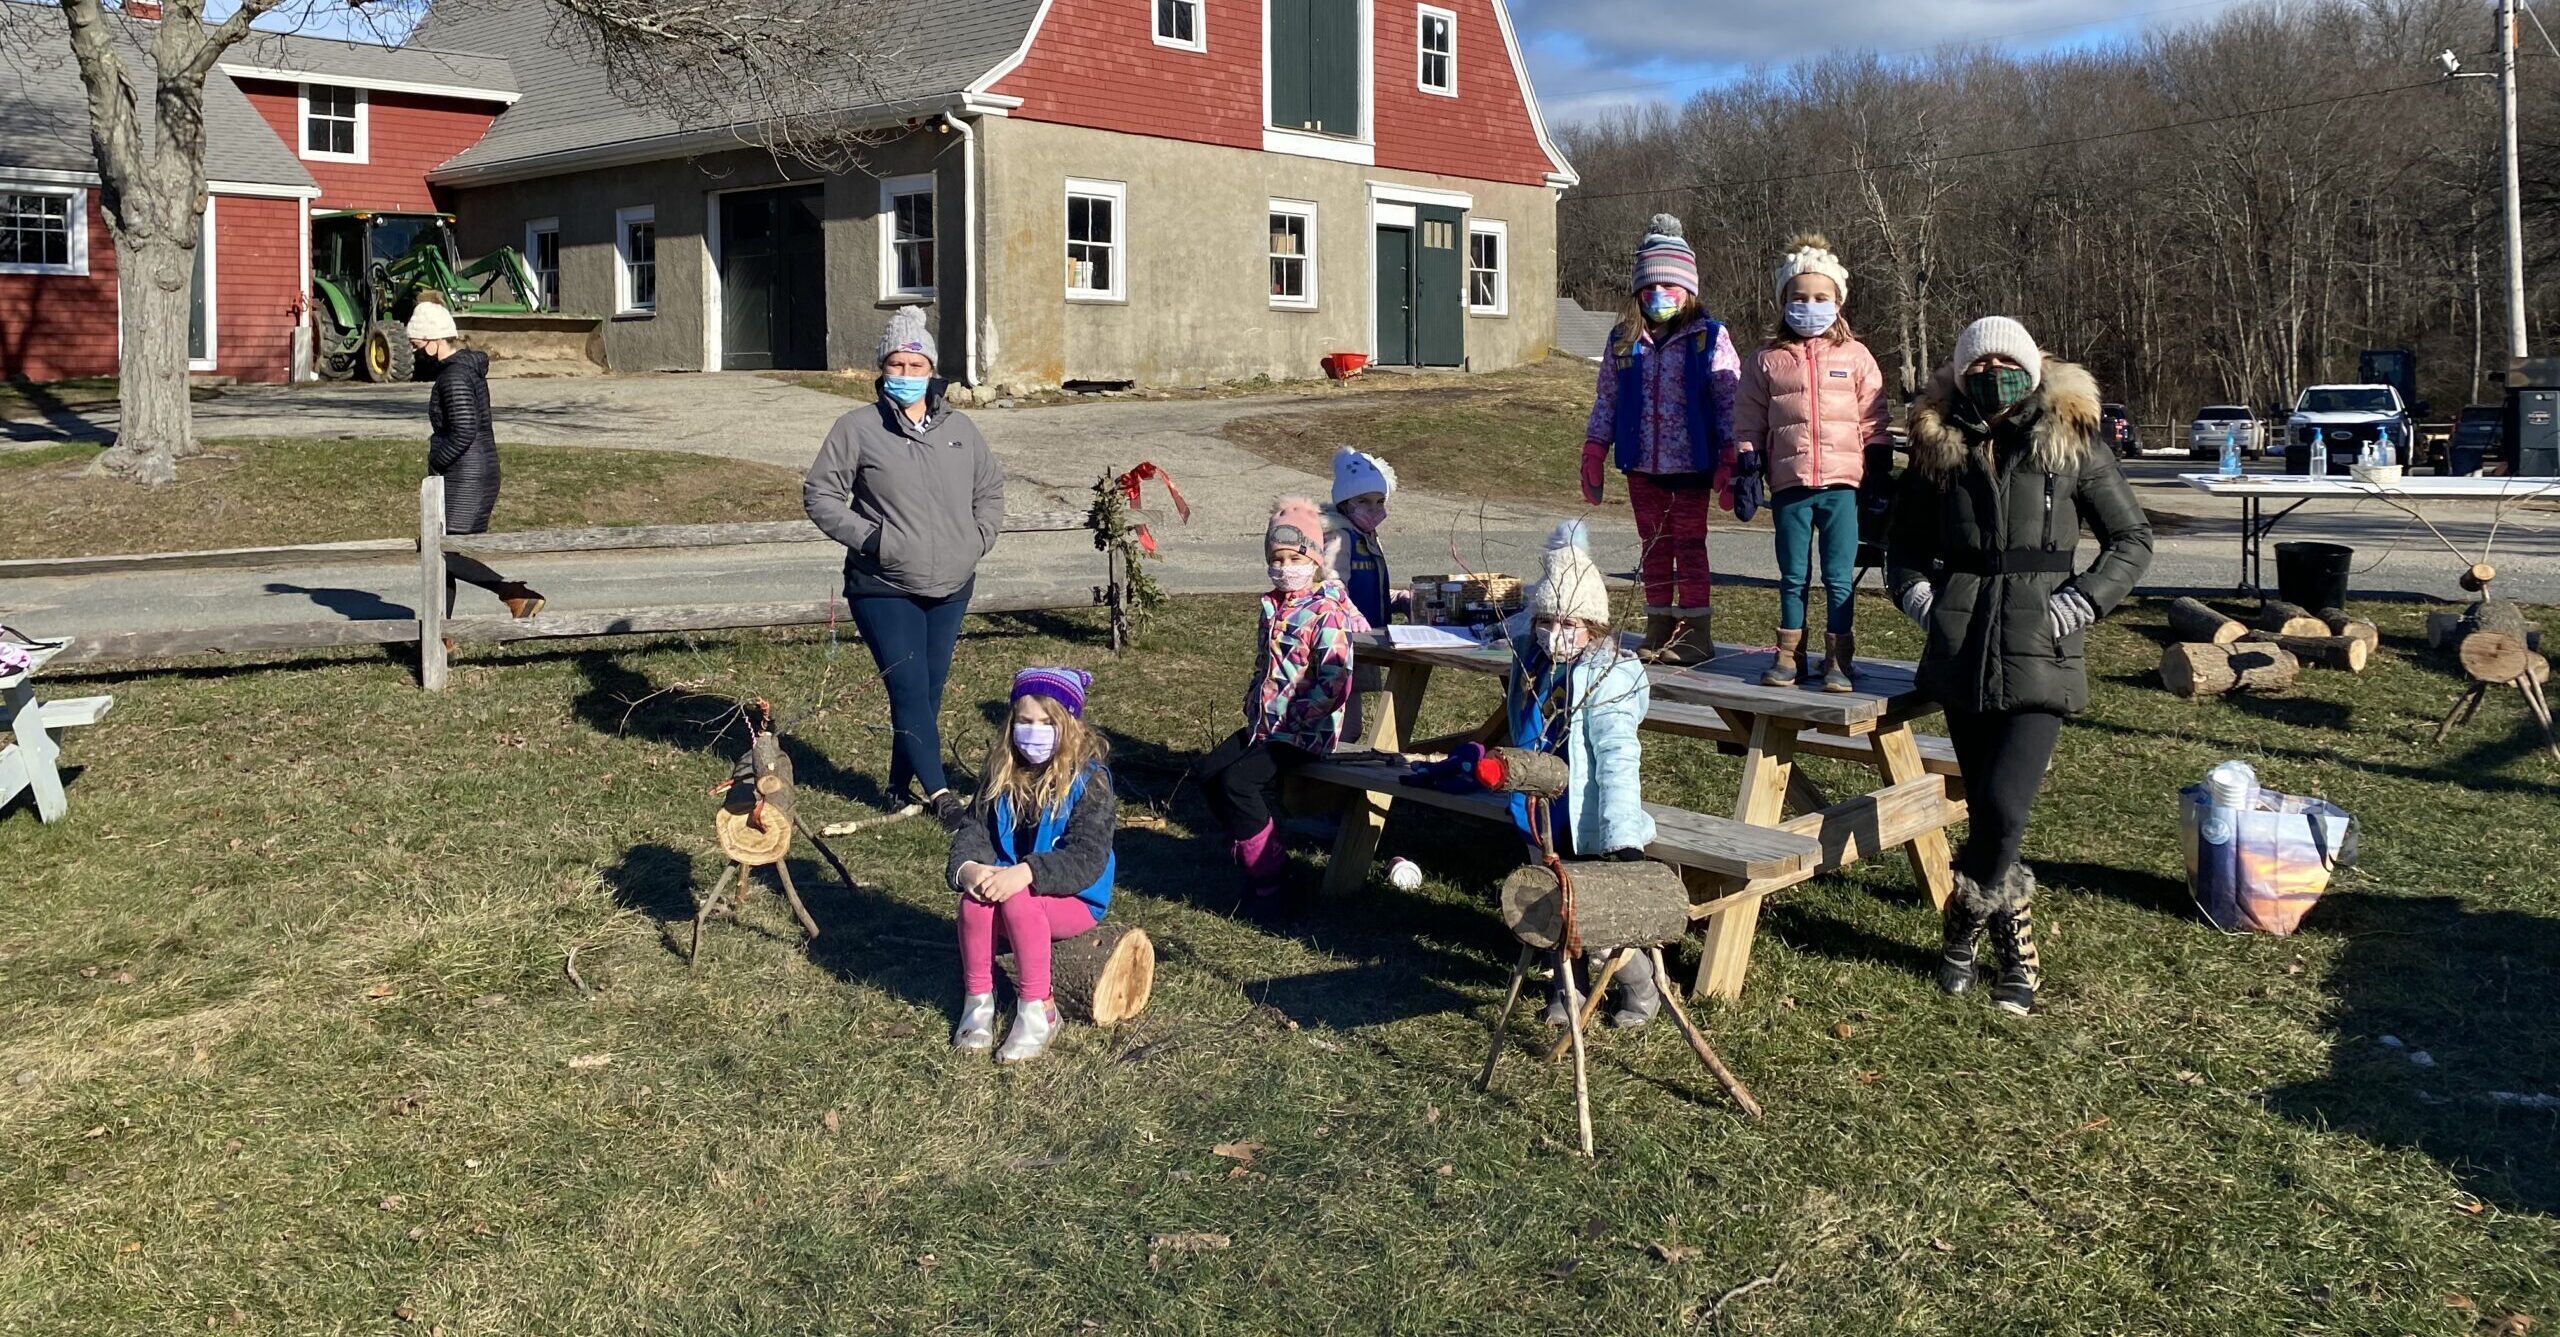 Participants in Reindeer Quest outdoors with reindeer statues at a Trustees farm